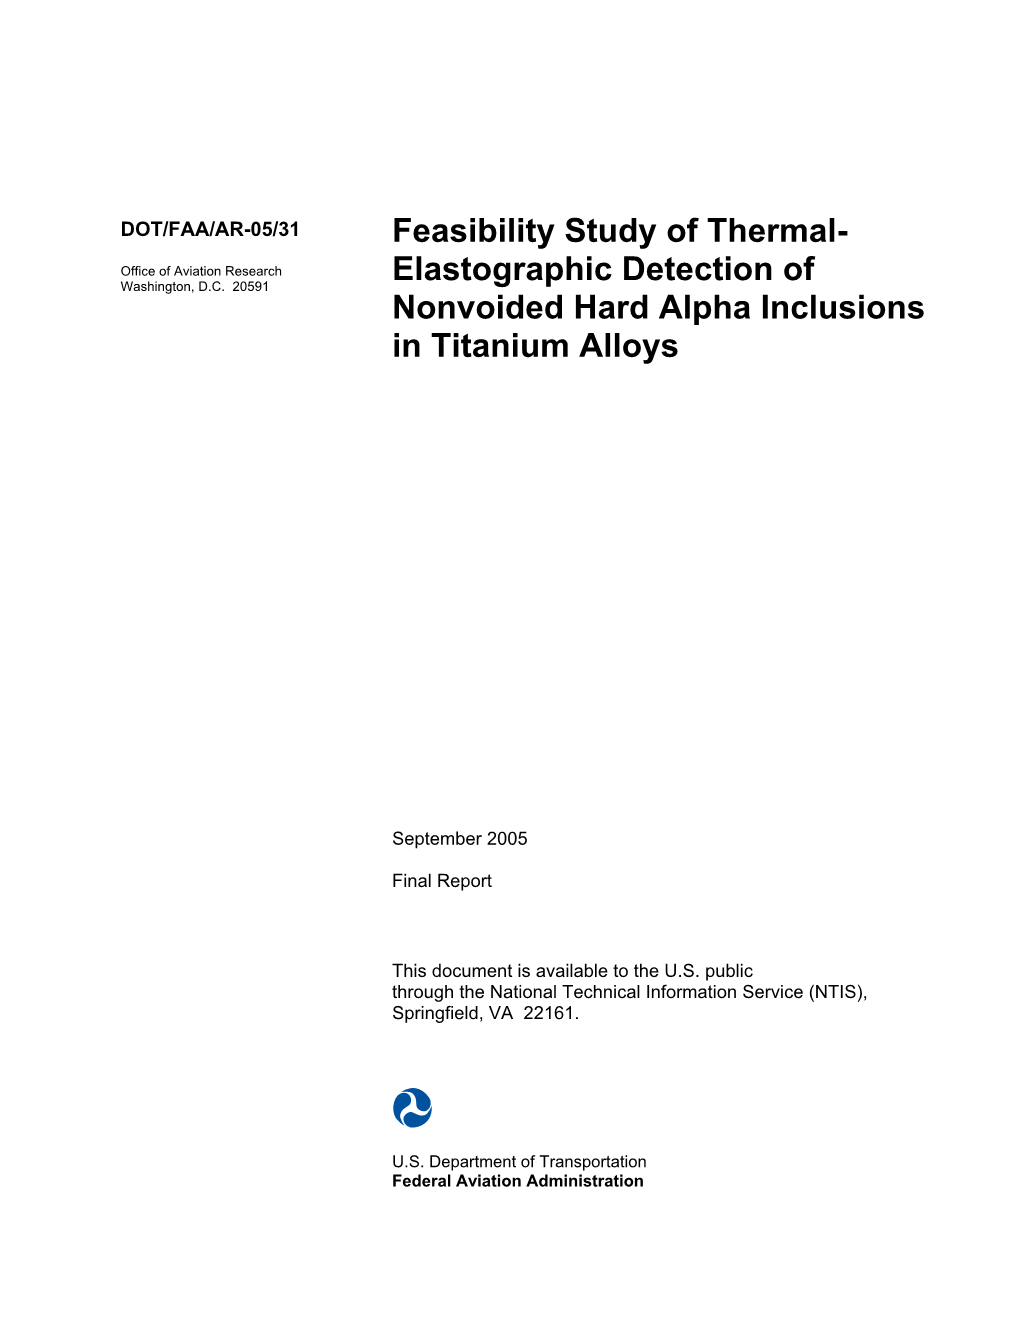 Feasibility Study of Thermal-Elastographic Detection of Nonvoided